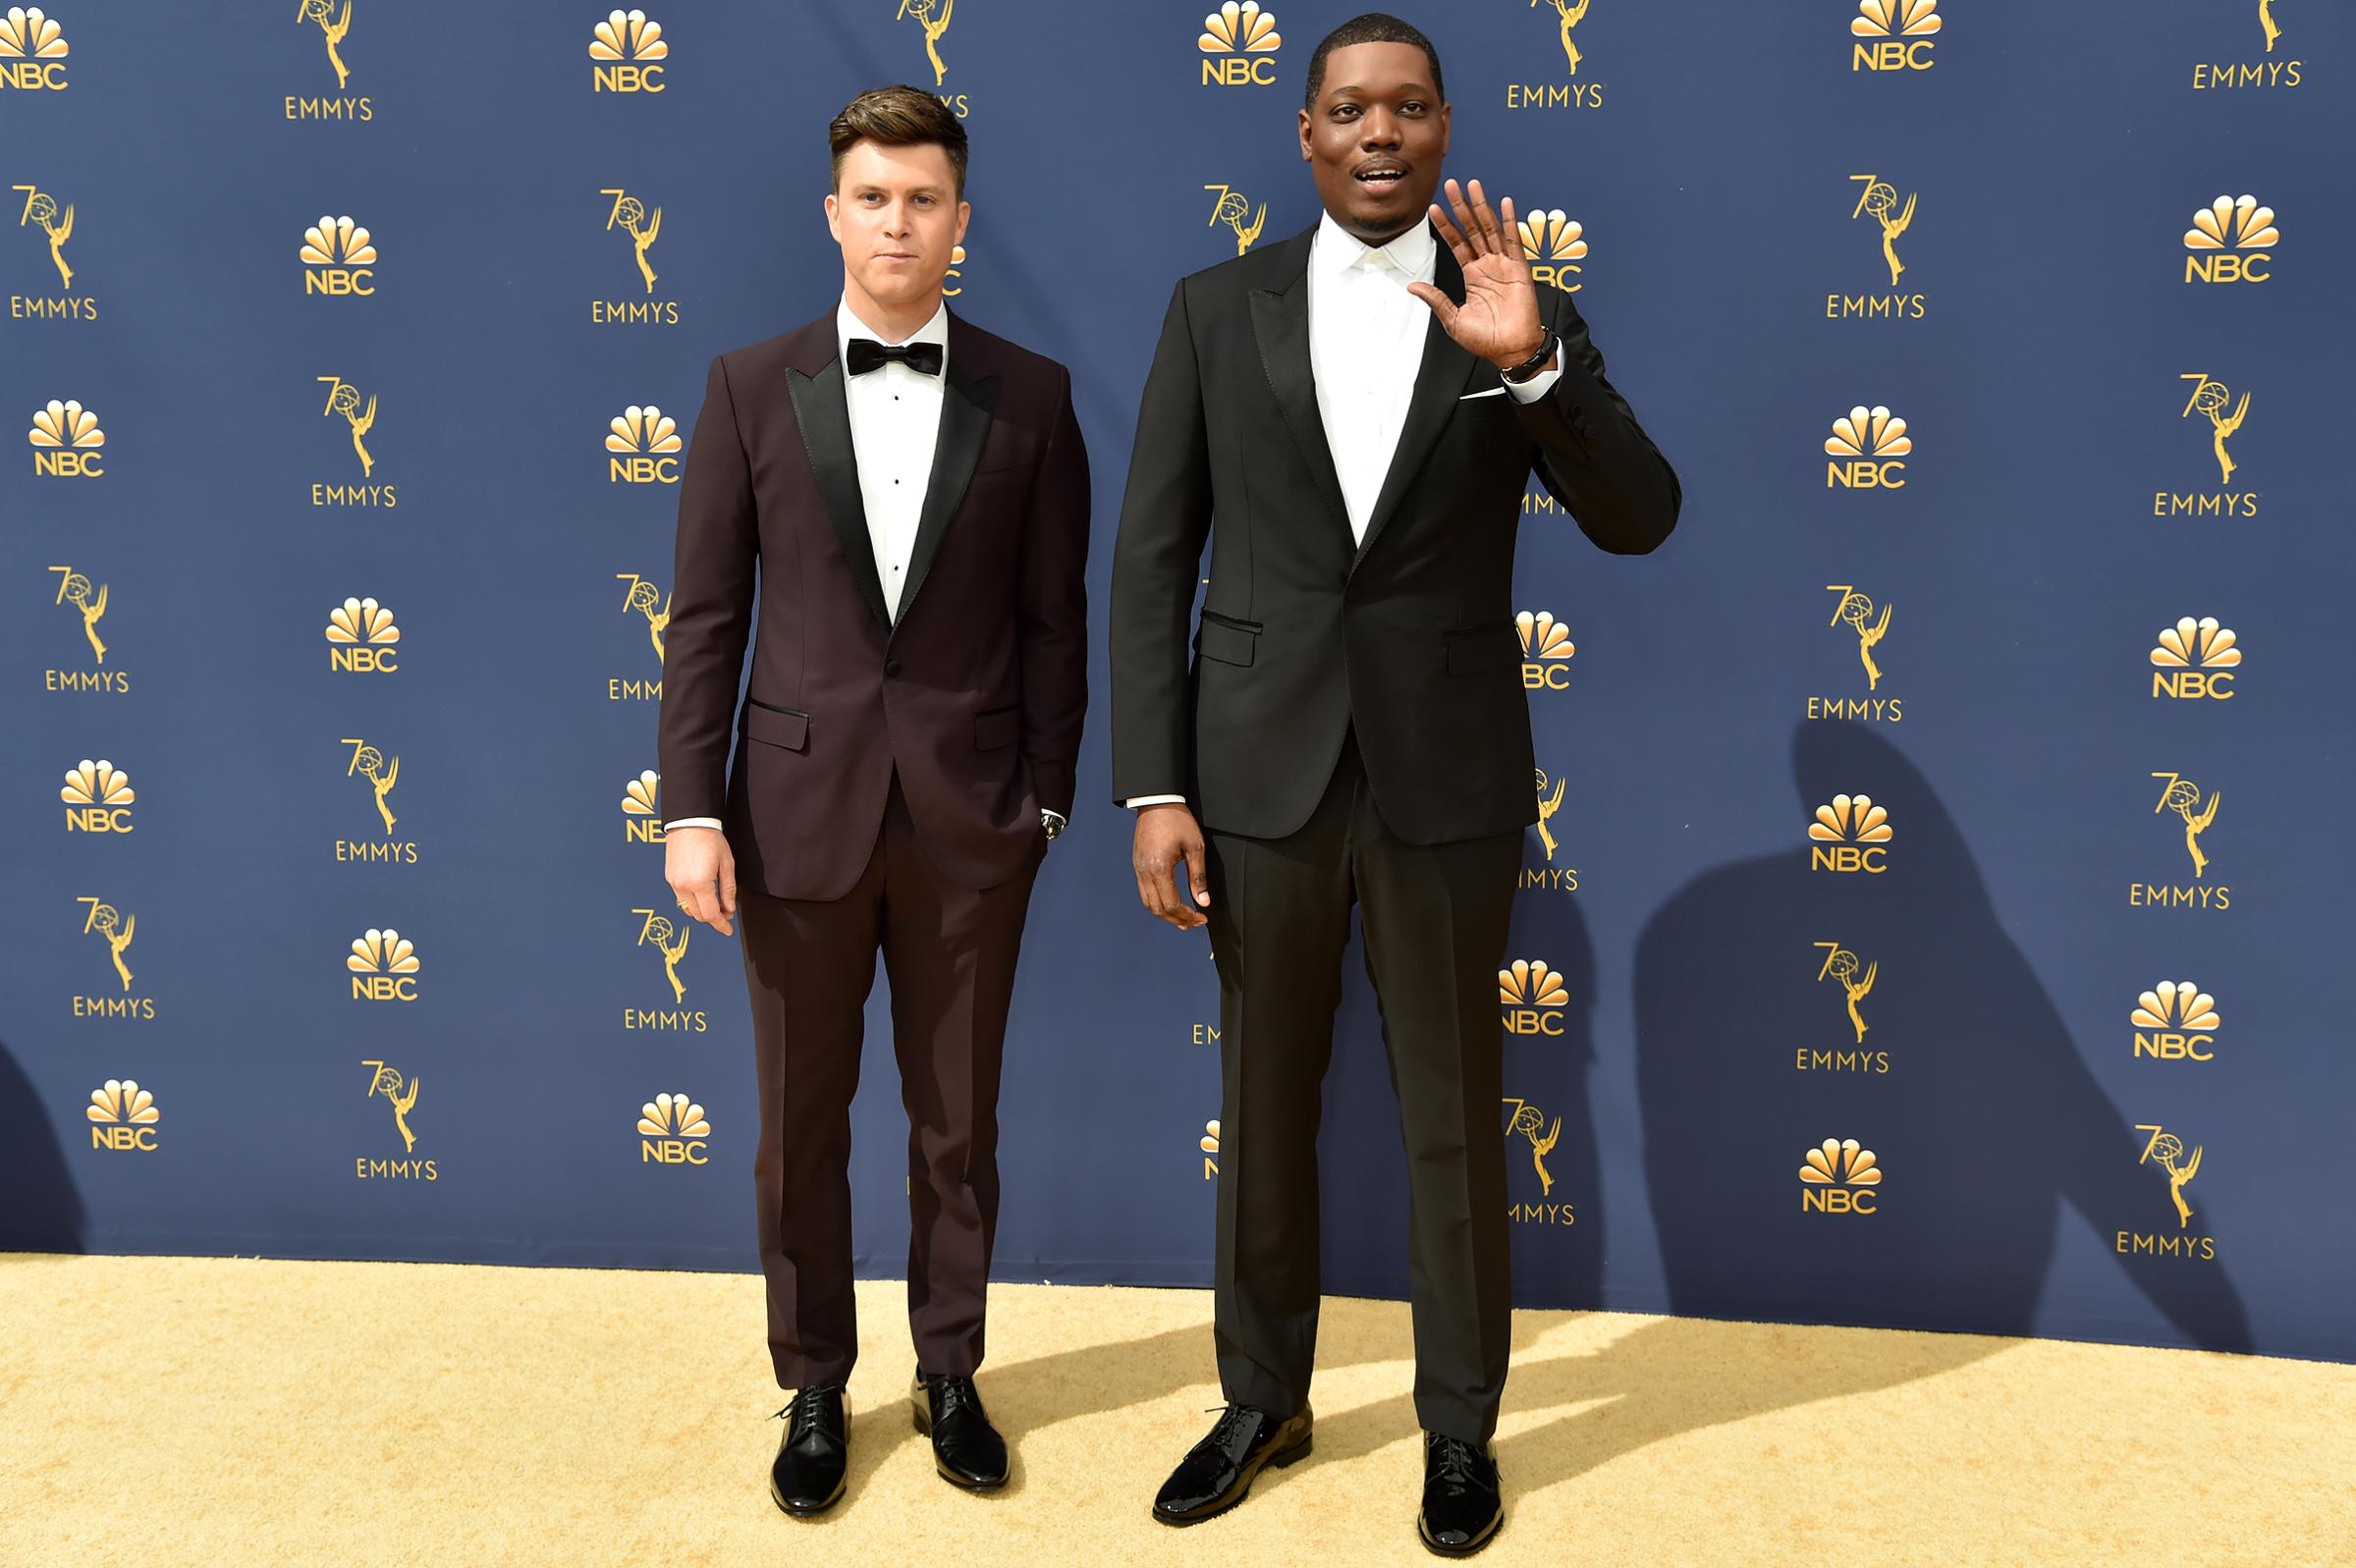 Hosts Colin Jost and Michael Che arrive at the 70th Emmy Awards on Sept. 17.